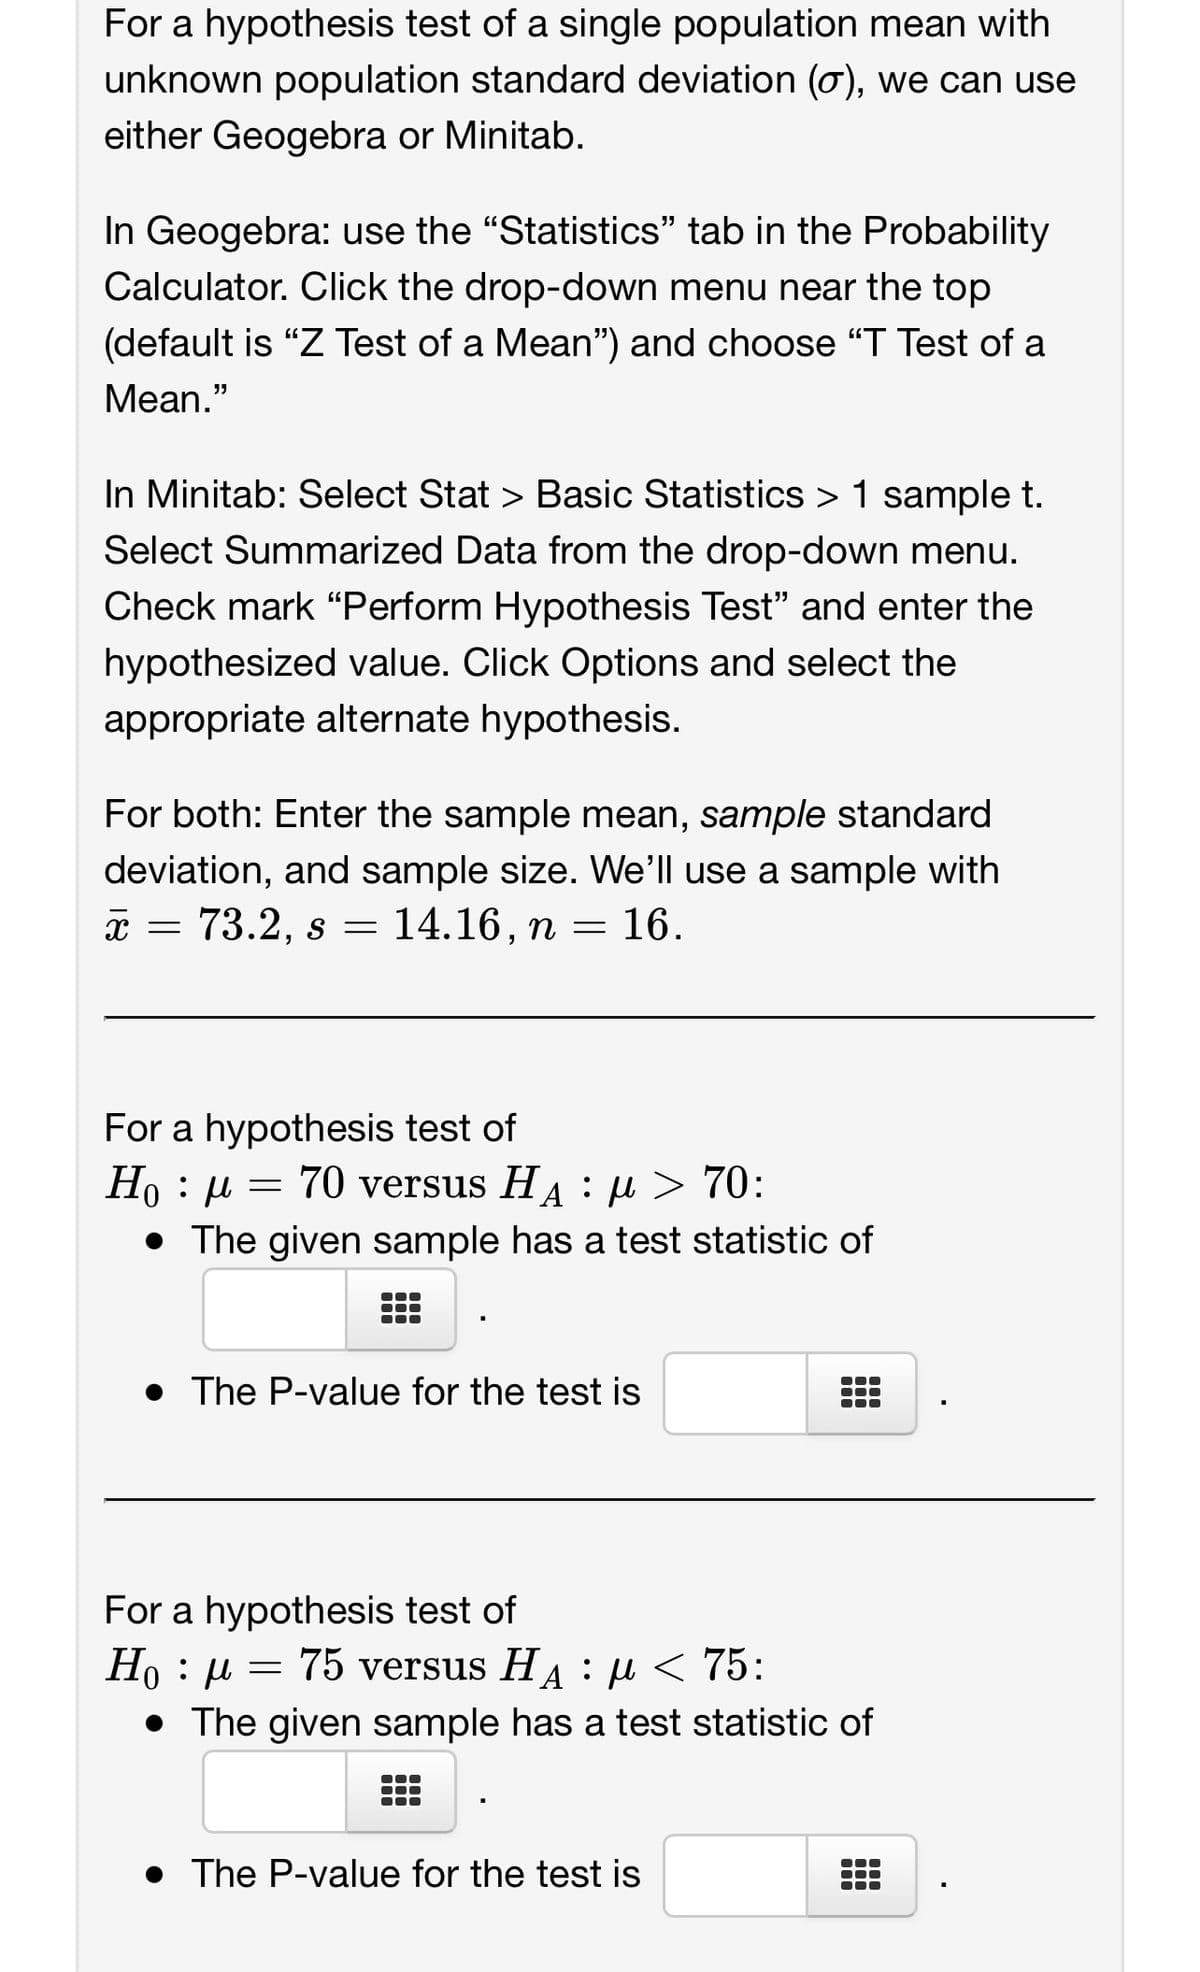 For a hypothesis test of a single population mean with
unknown population standard deviation (o), we can use
either Geogebra or Minitab.
In Geogebra: use the "Statistics" tab in the Probability
Calculator. Click the drop-down menu near the top
(default is "Z Test of a Mean") and choose "T Test of a
Mean."
In Minitab: Select Stat > Basic Statistics > 1 sample t.
Select Summarized Data from the drop-down menu.
Check mark "Perform Hypothesis Test" and enter the
hypothesized value. Click Options and select the
appropriate alternate hypothesis.
For both: Enter the sample mean, sample standard
deviation, and sample size. We'll use a sample with
x = 73.2, s = 14.16, n = 16.
For a hypothesis test of
Ho : μ = 70 versus H₁ : μ> 70:
A
• The given sample has a test statistic of
• The P-value for the test is
For a hypothesis test of
Ho μ = 75 versus H₁ μ< 75:
:
:
• The given sample has a test statistic of
• The P-value for the test is